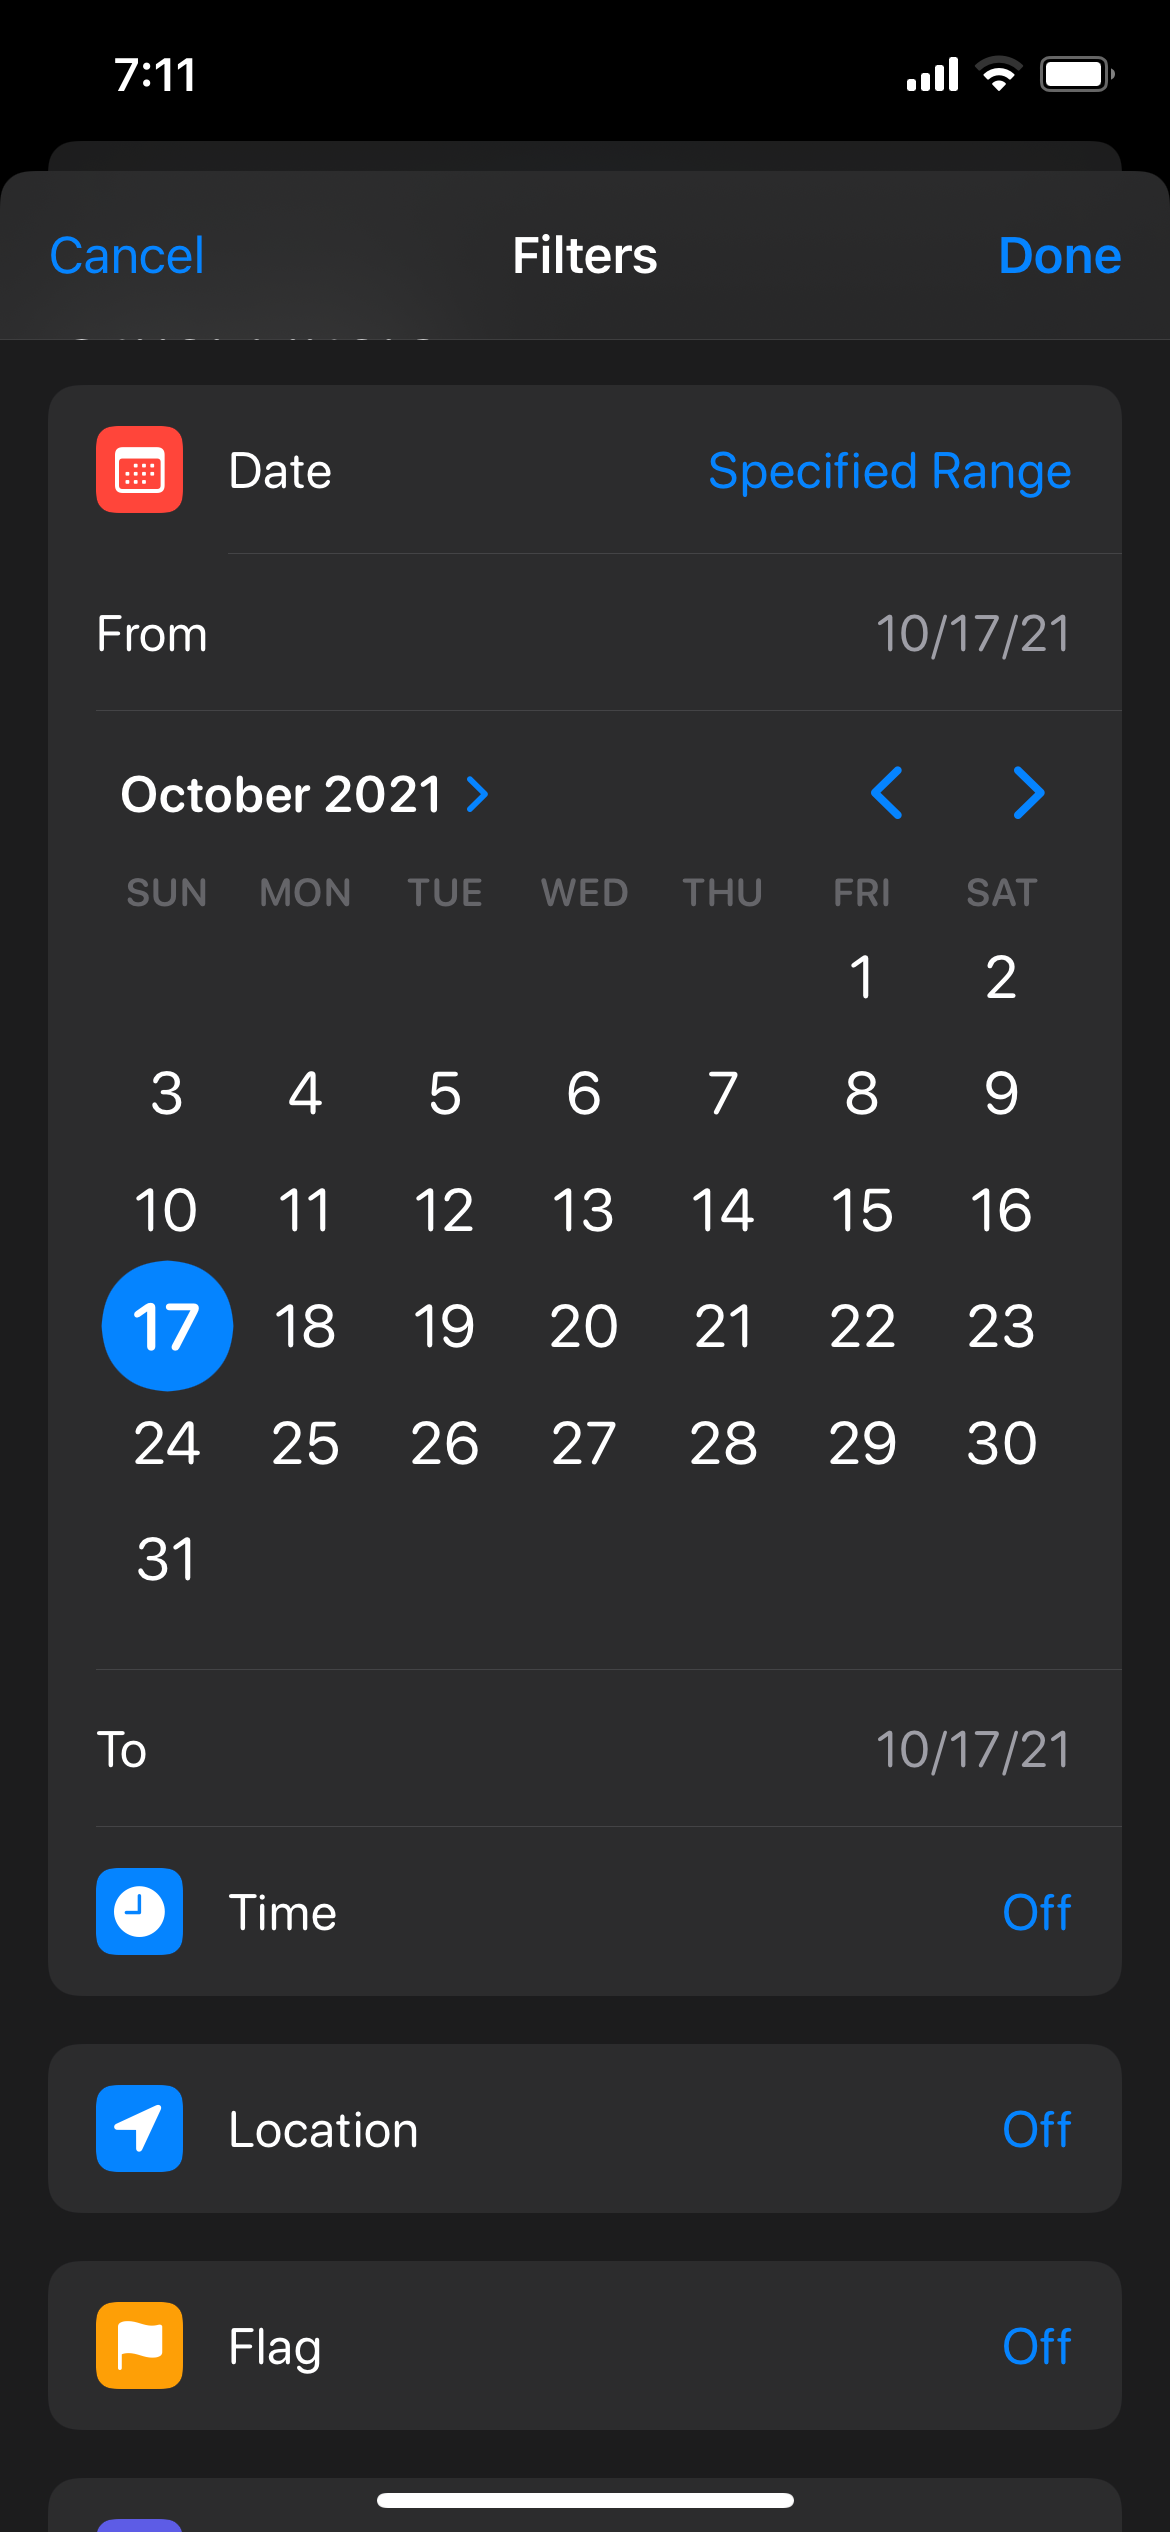 Specified Range Date Filter on Reminders